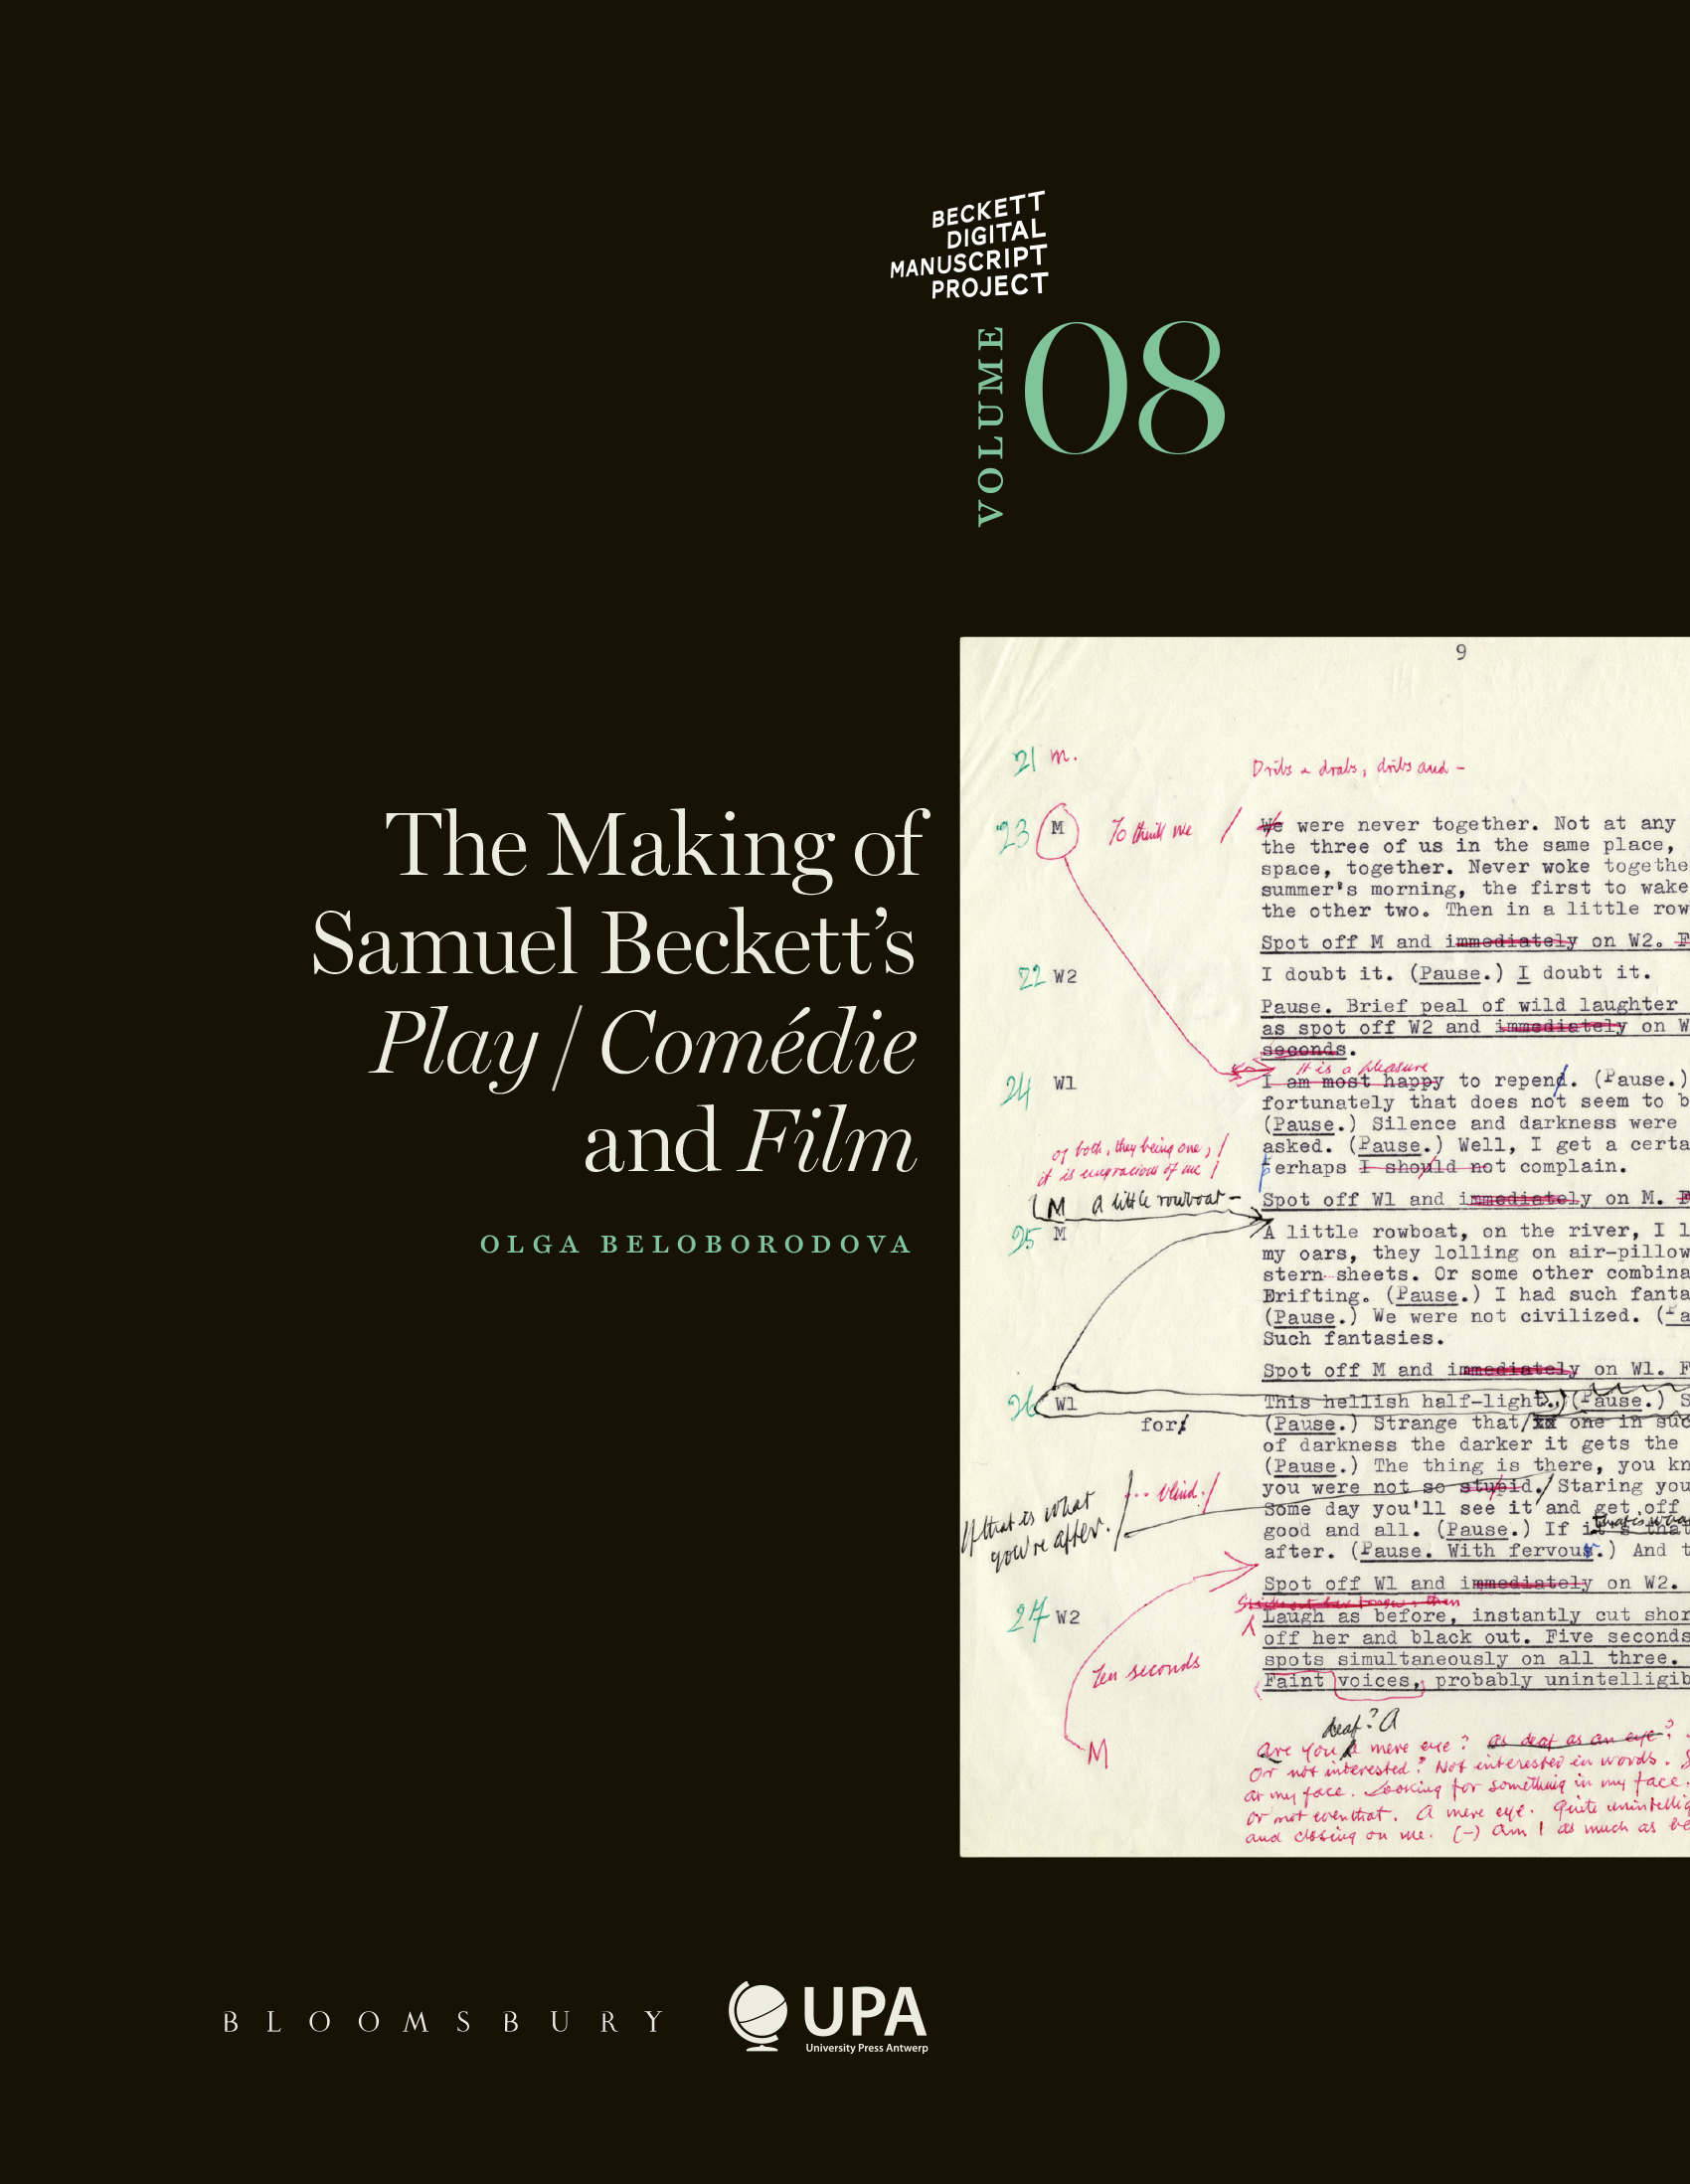 THE MAKING OF SAMUEL BECKETT’S PLAY/COMÉDIE AND FILM